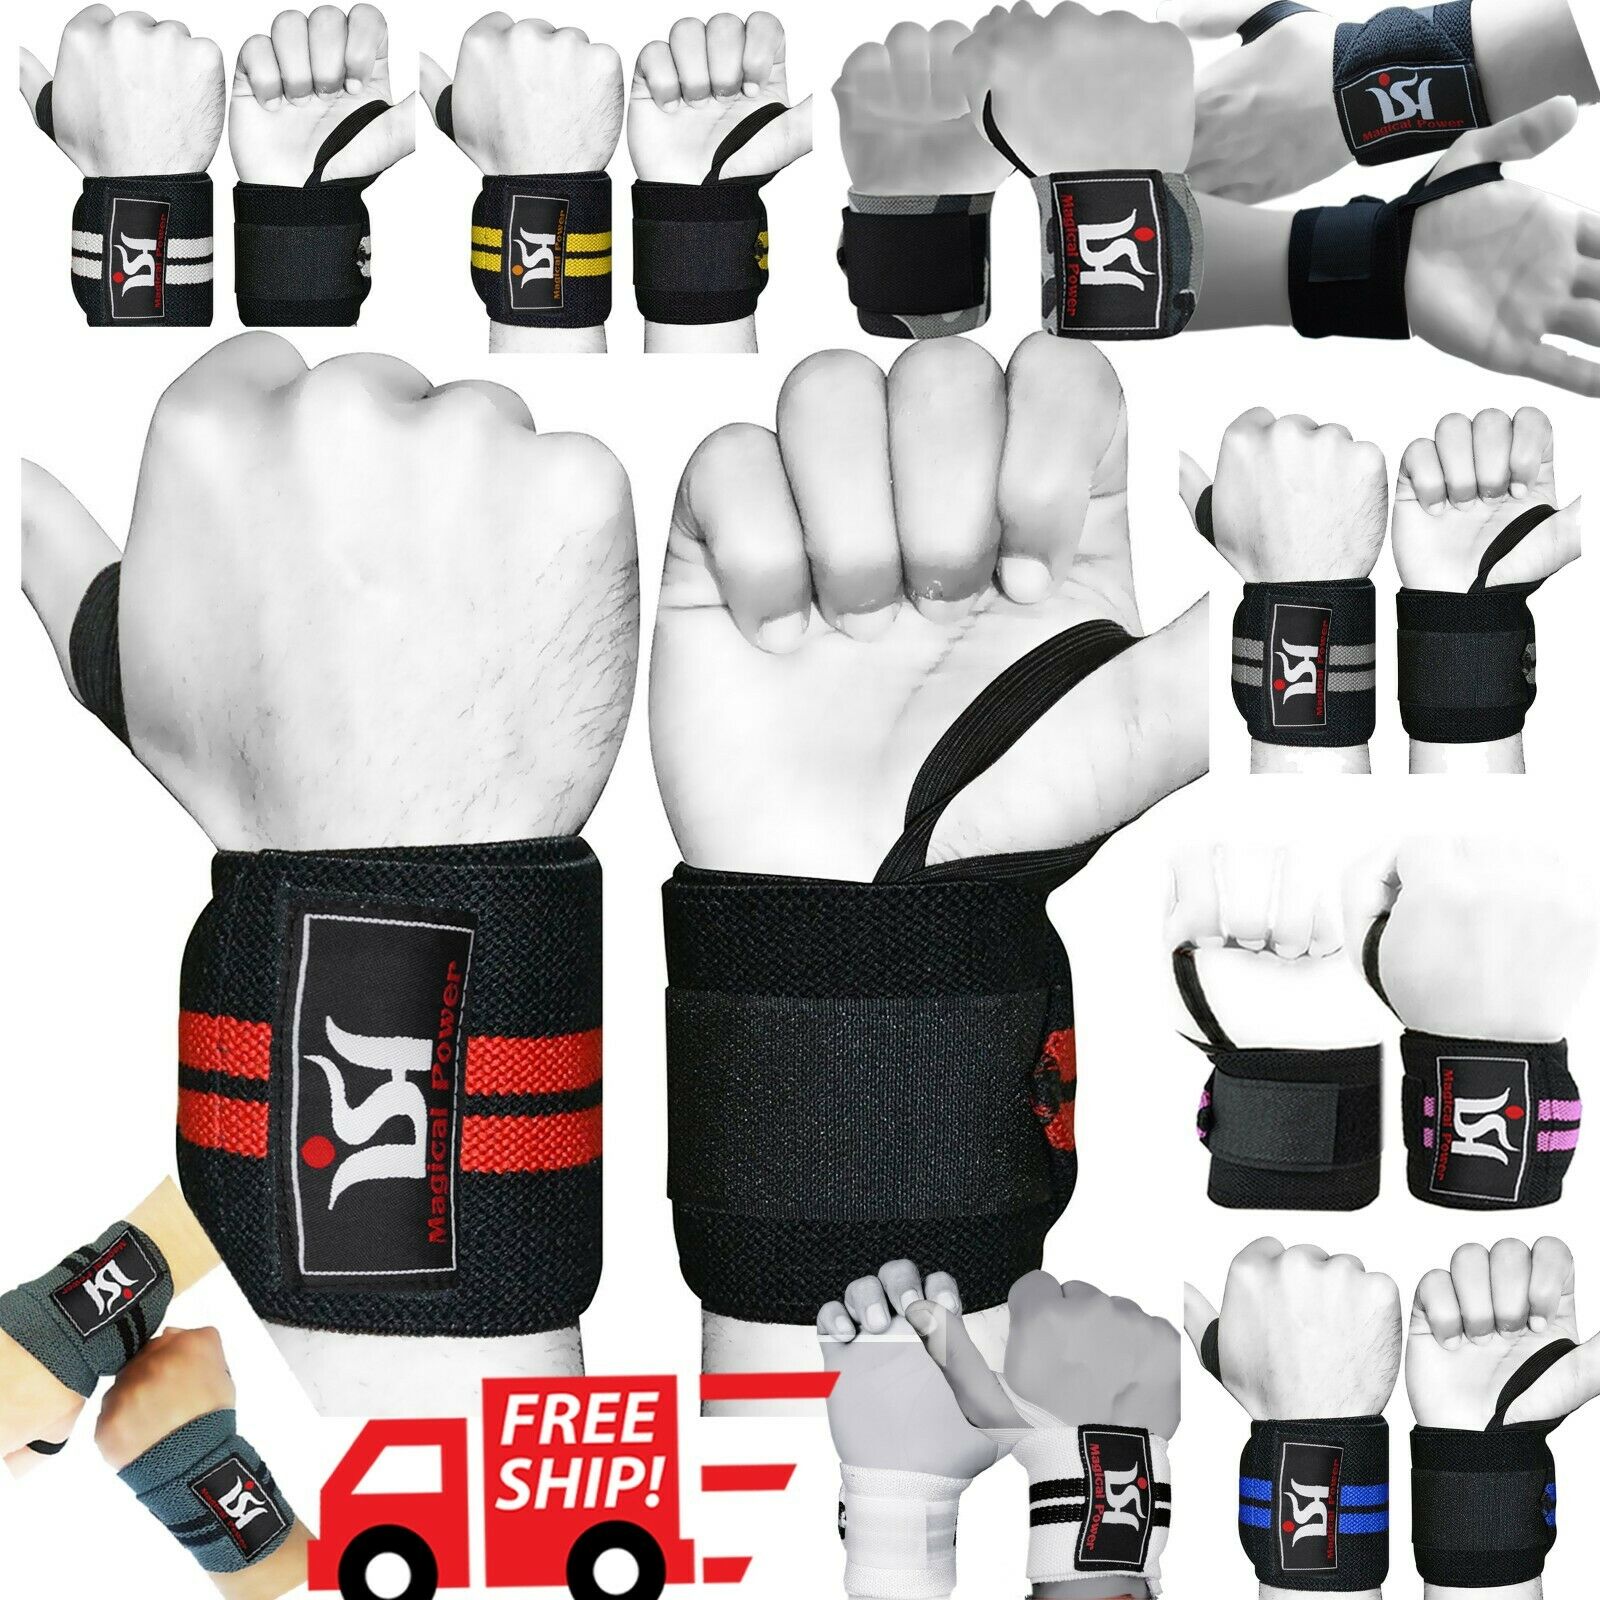 Gym Training Power Weight Lifting Wrist Wraps Straps Bandage Cross Fit Support